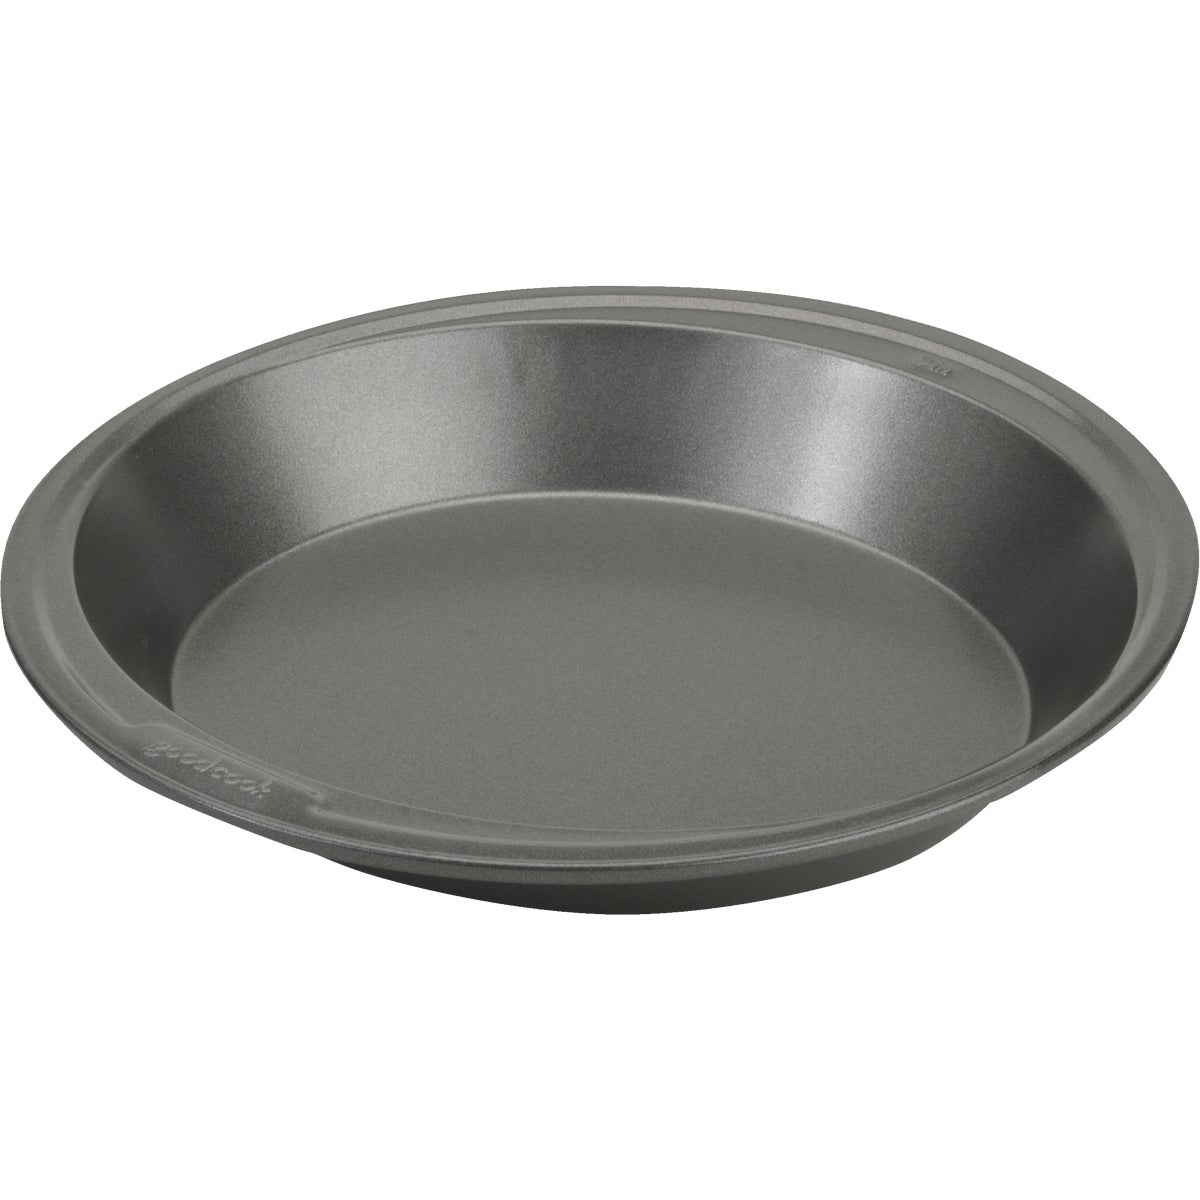 Item 603238, GoodCook pie pan is designed to distribute heat evenly and quickly to 